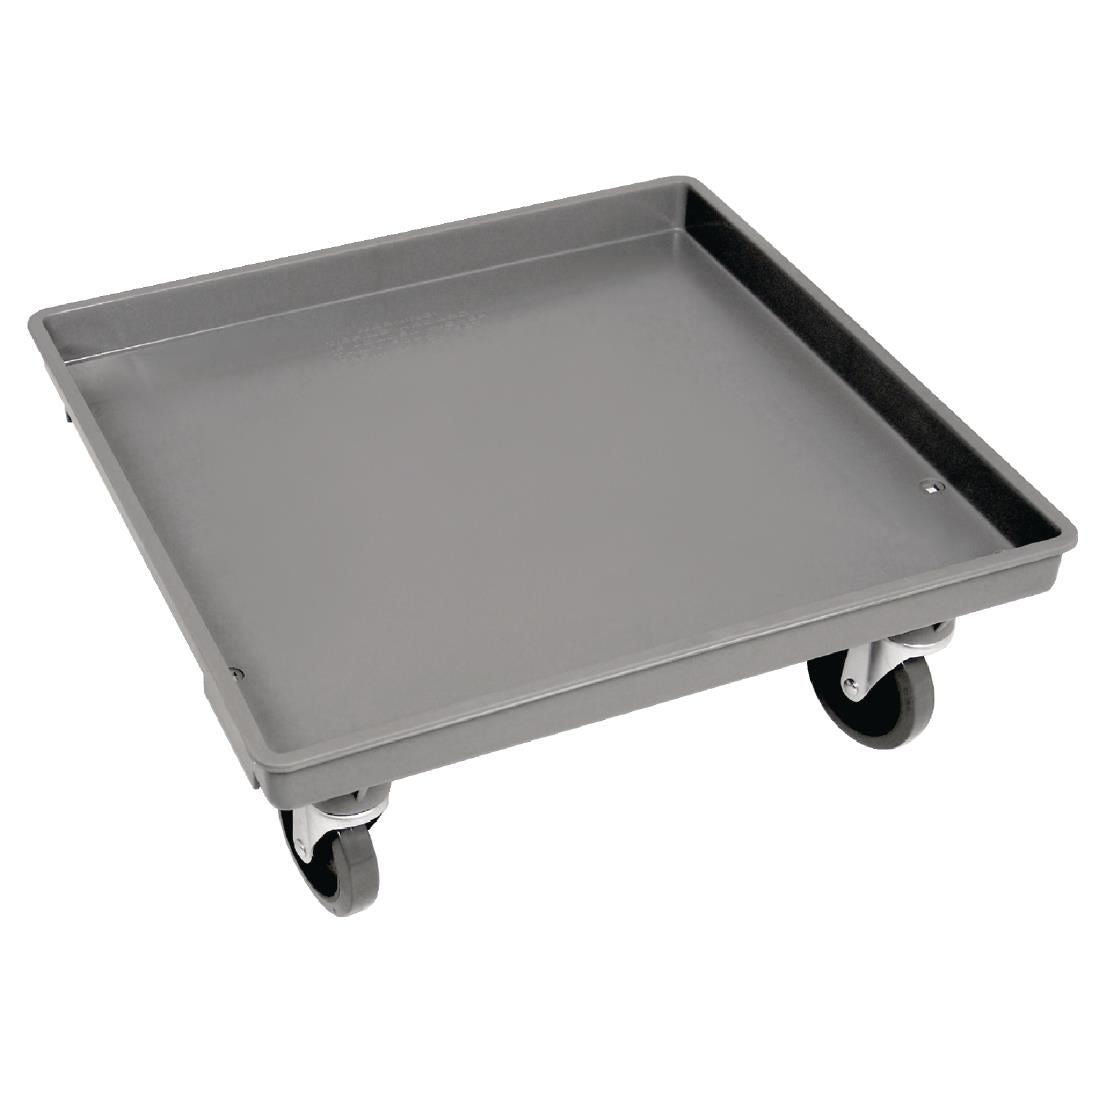 Dishwasher Rack Dolly JD Catering Equipment Solutions Ltd